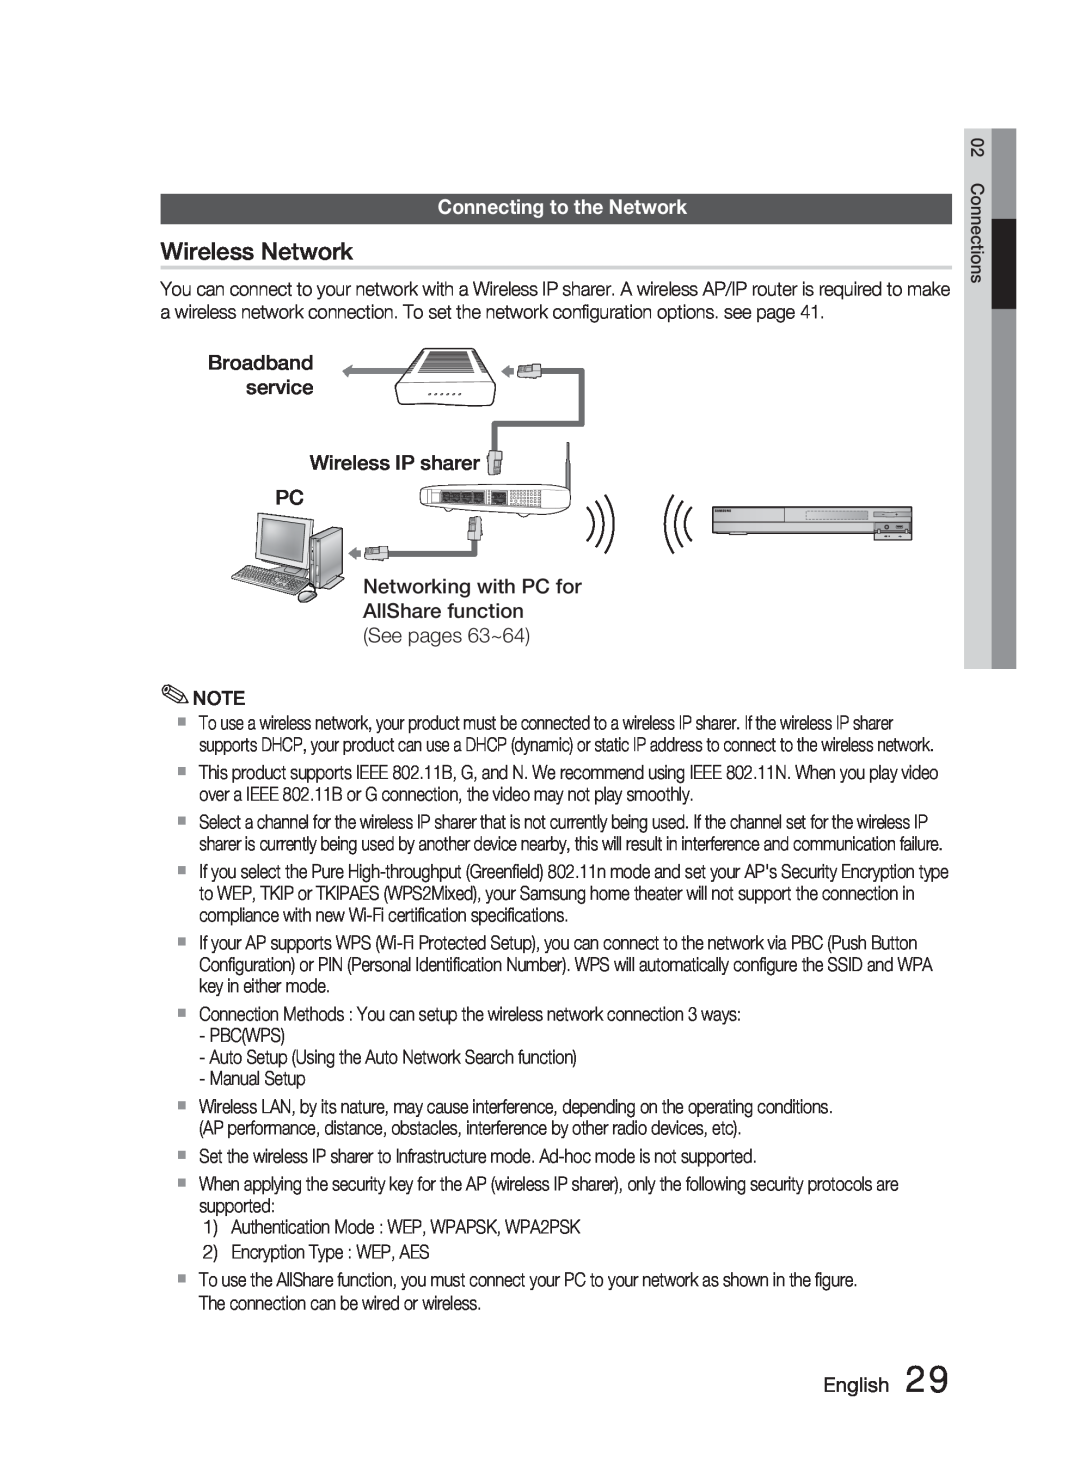 Samsung HT-C6900W user manual Wireless Network, Broadband service Wireless IP sharer PC, Connecting to the Network, English 